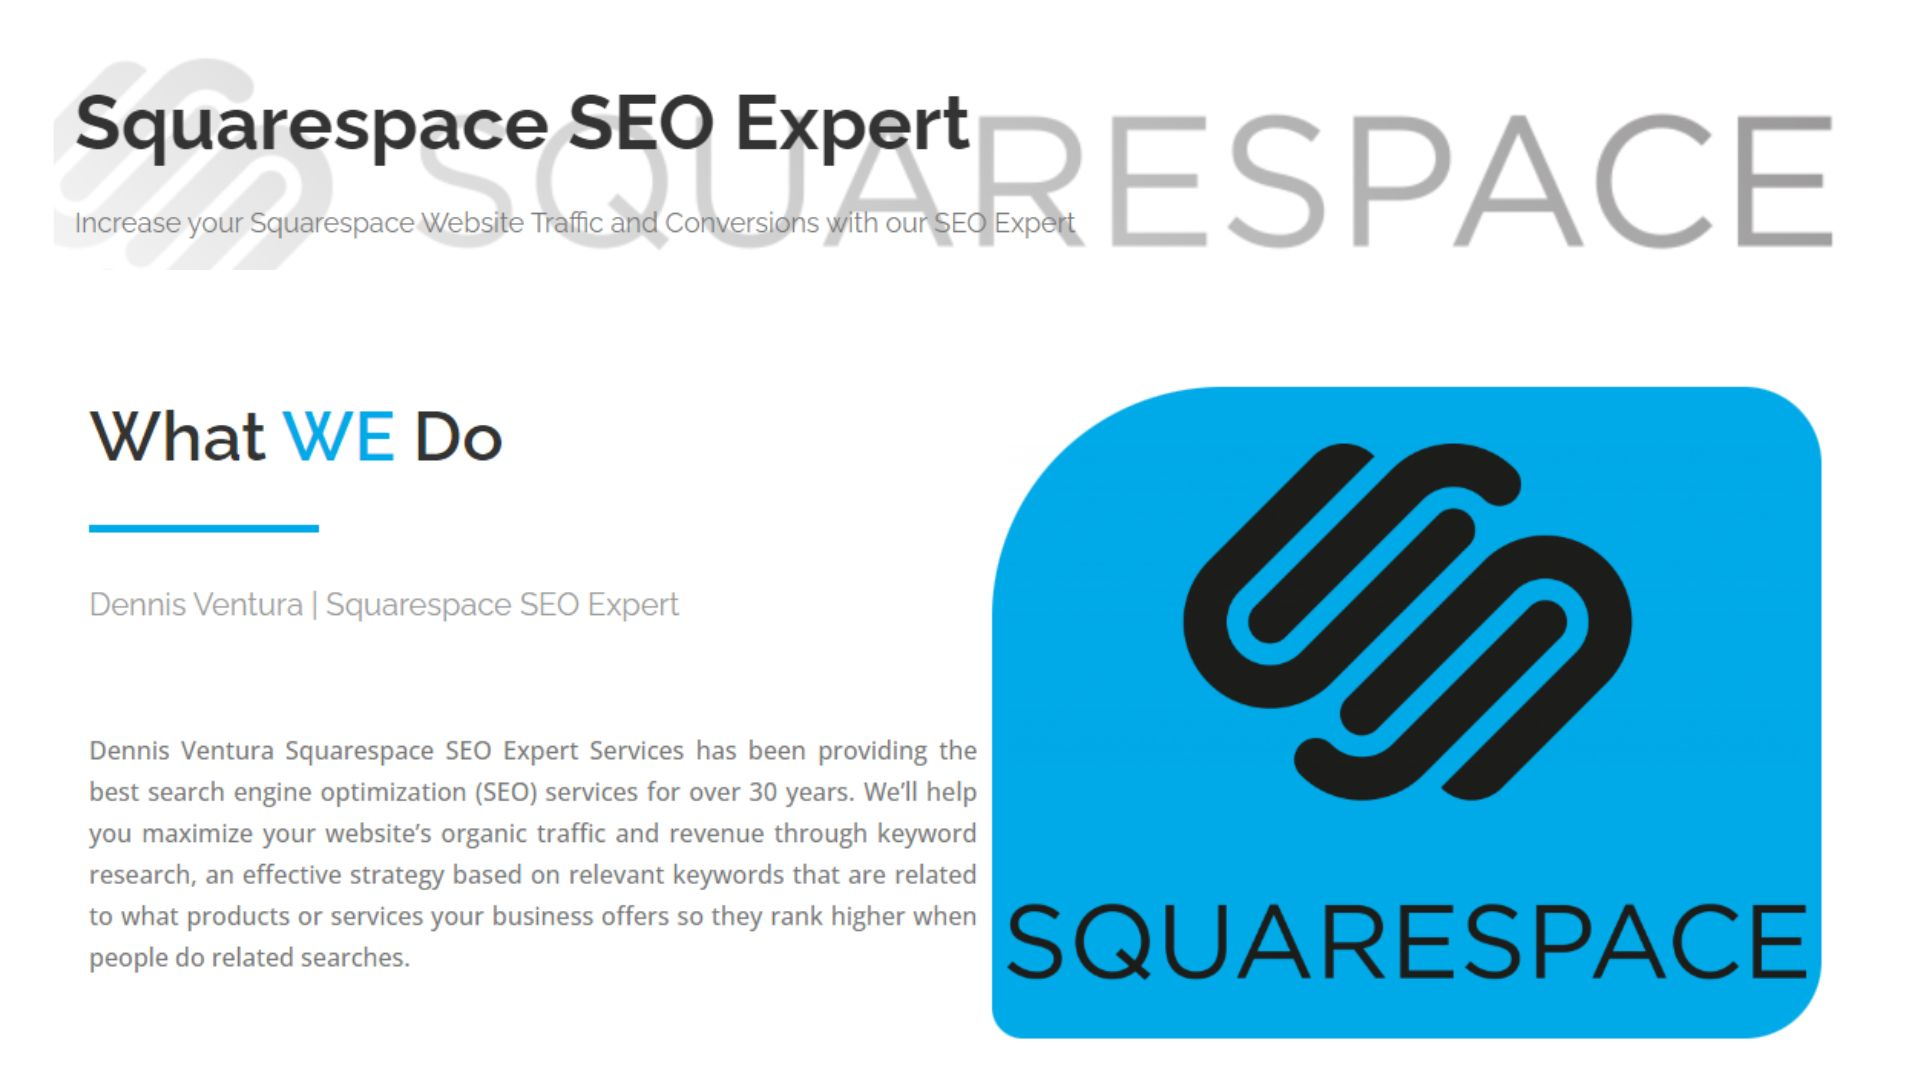 How to Hire a Squarespace SEO Expert?